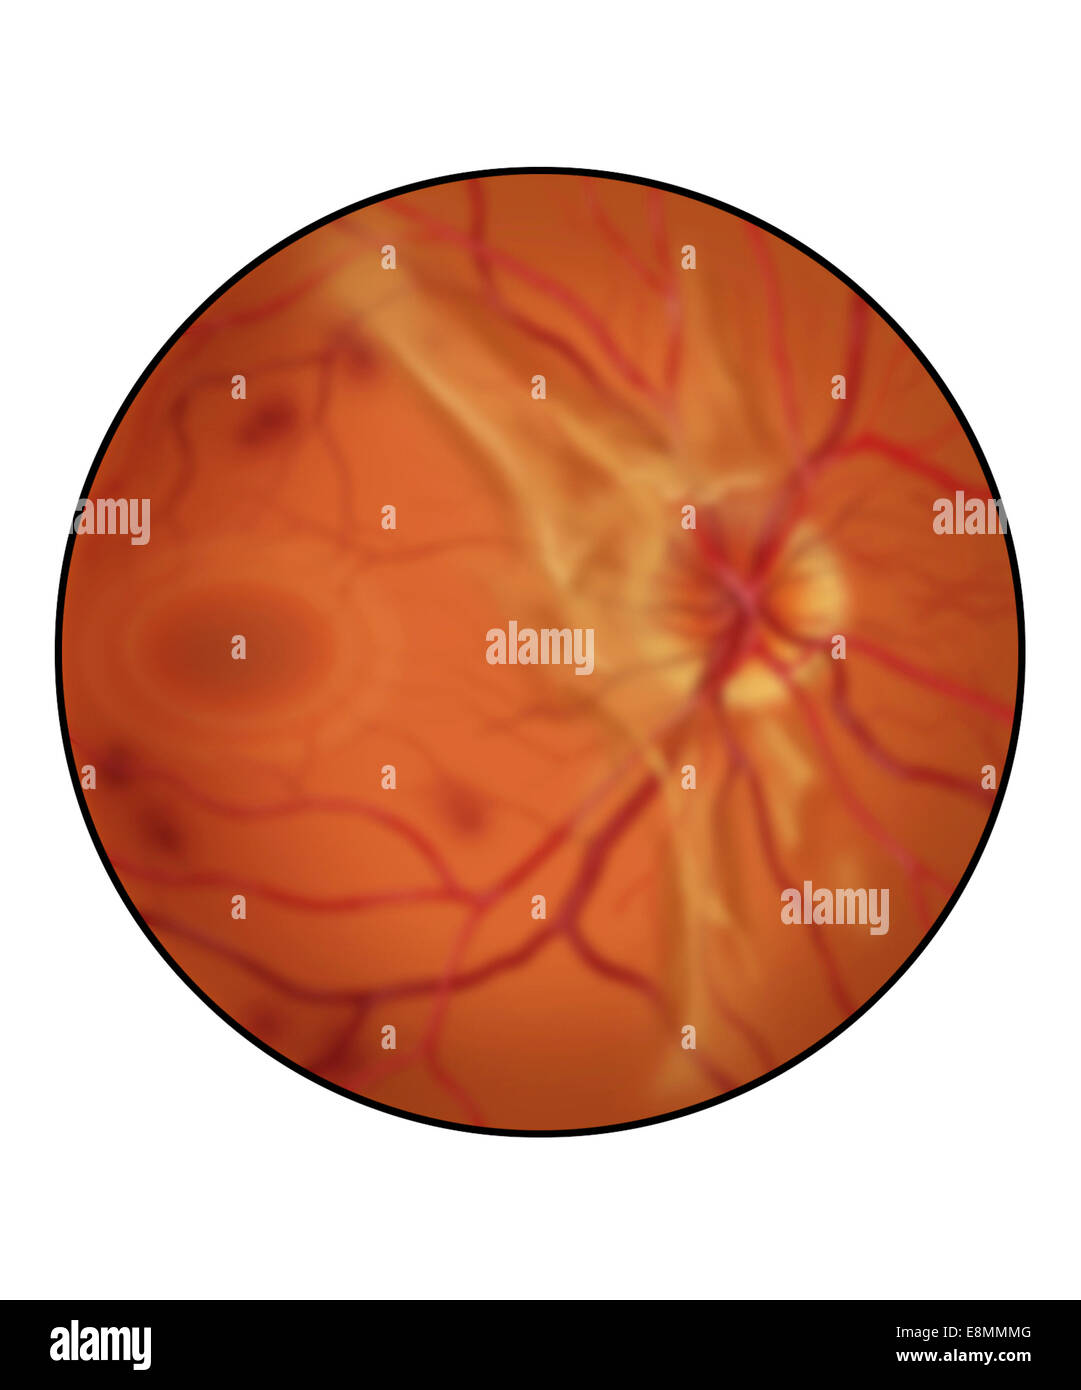 Retina with advanced diabetic retinopathy, showing increased scar tissue, hemorrhaging and diffuse vitreous blood (blurred appea Stock Photo